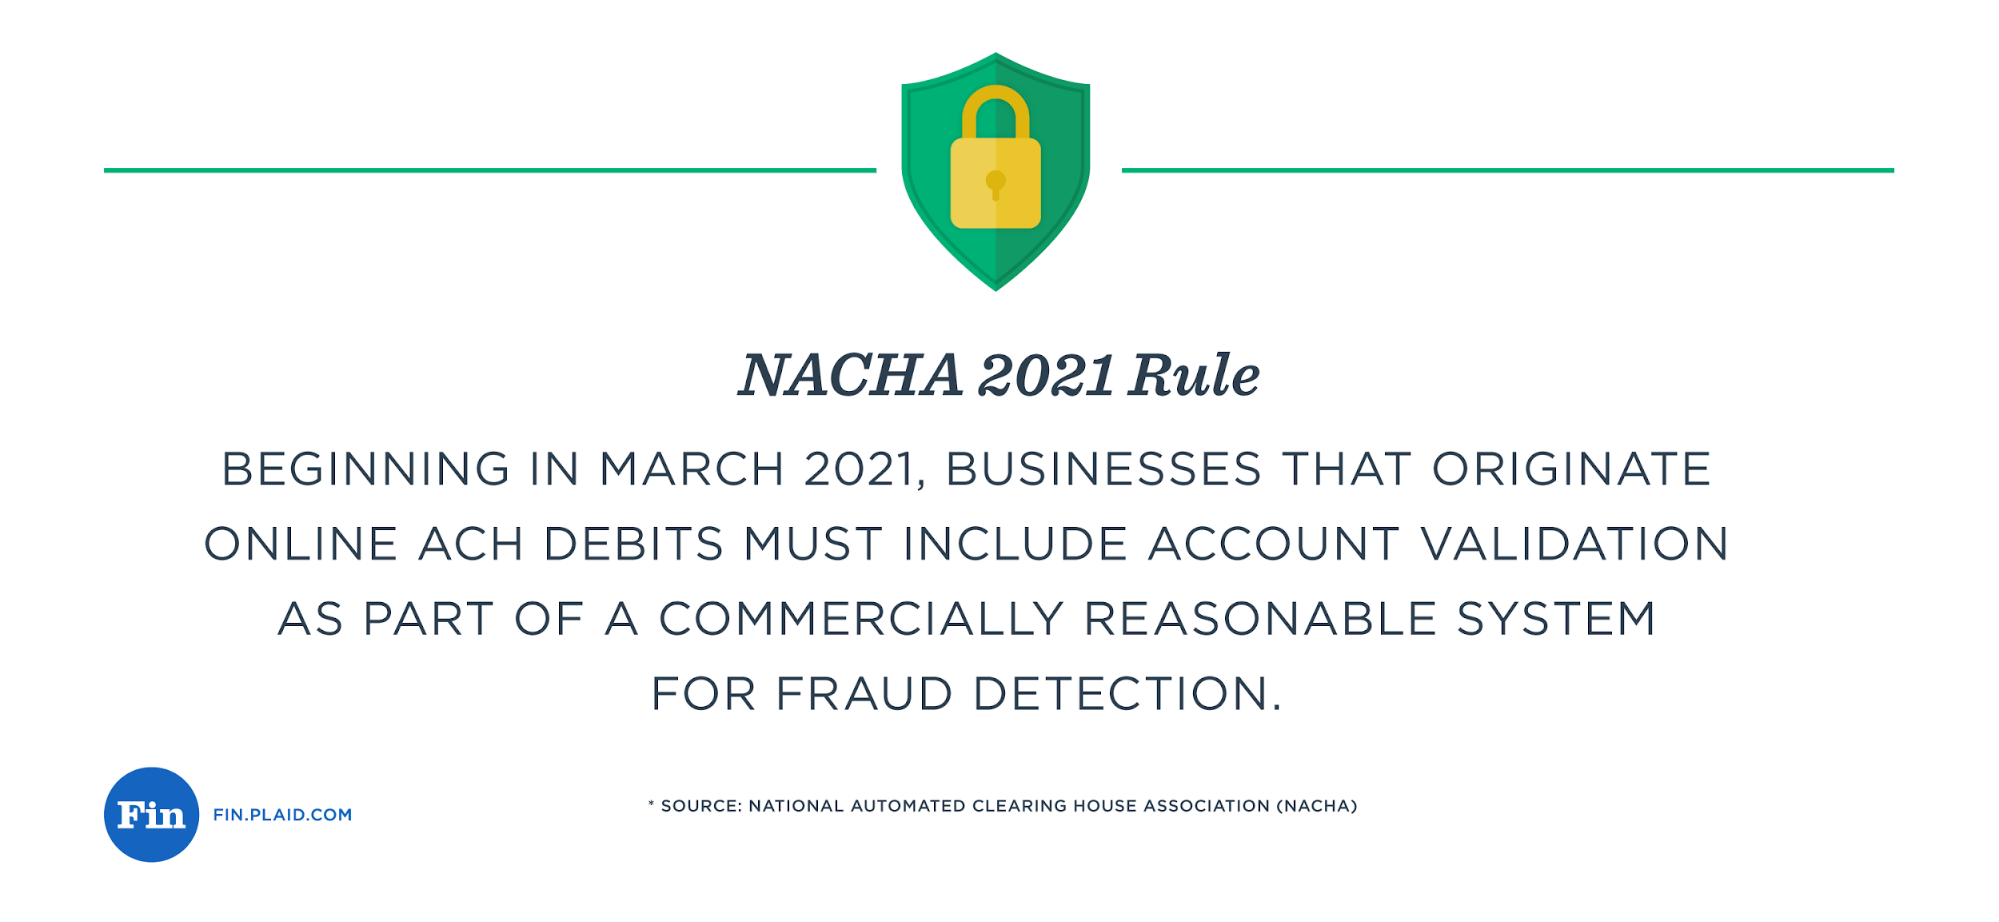 NACHA’s 2021 rule: what does it mean for your business?